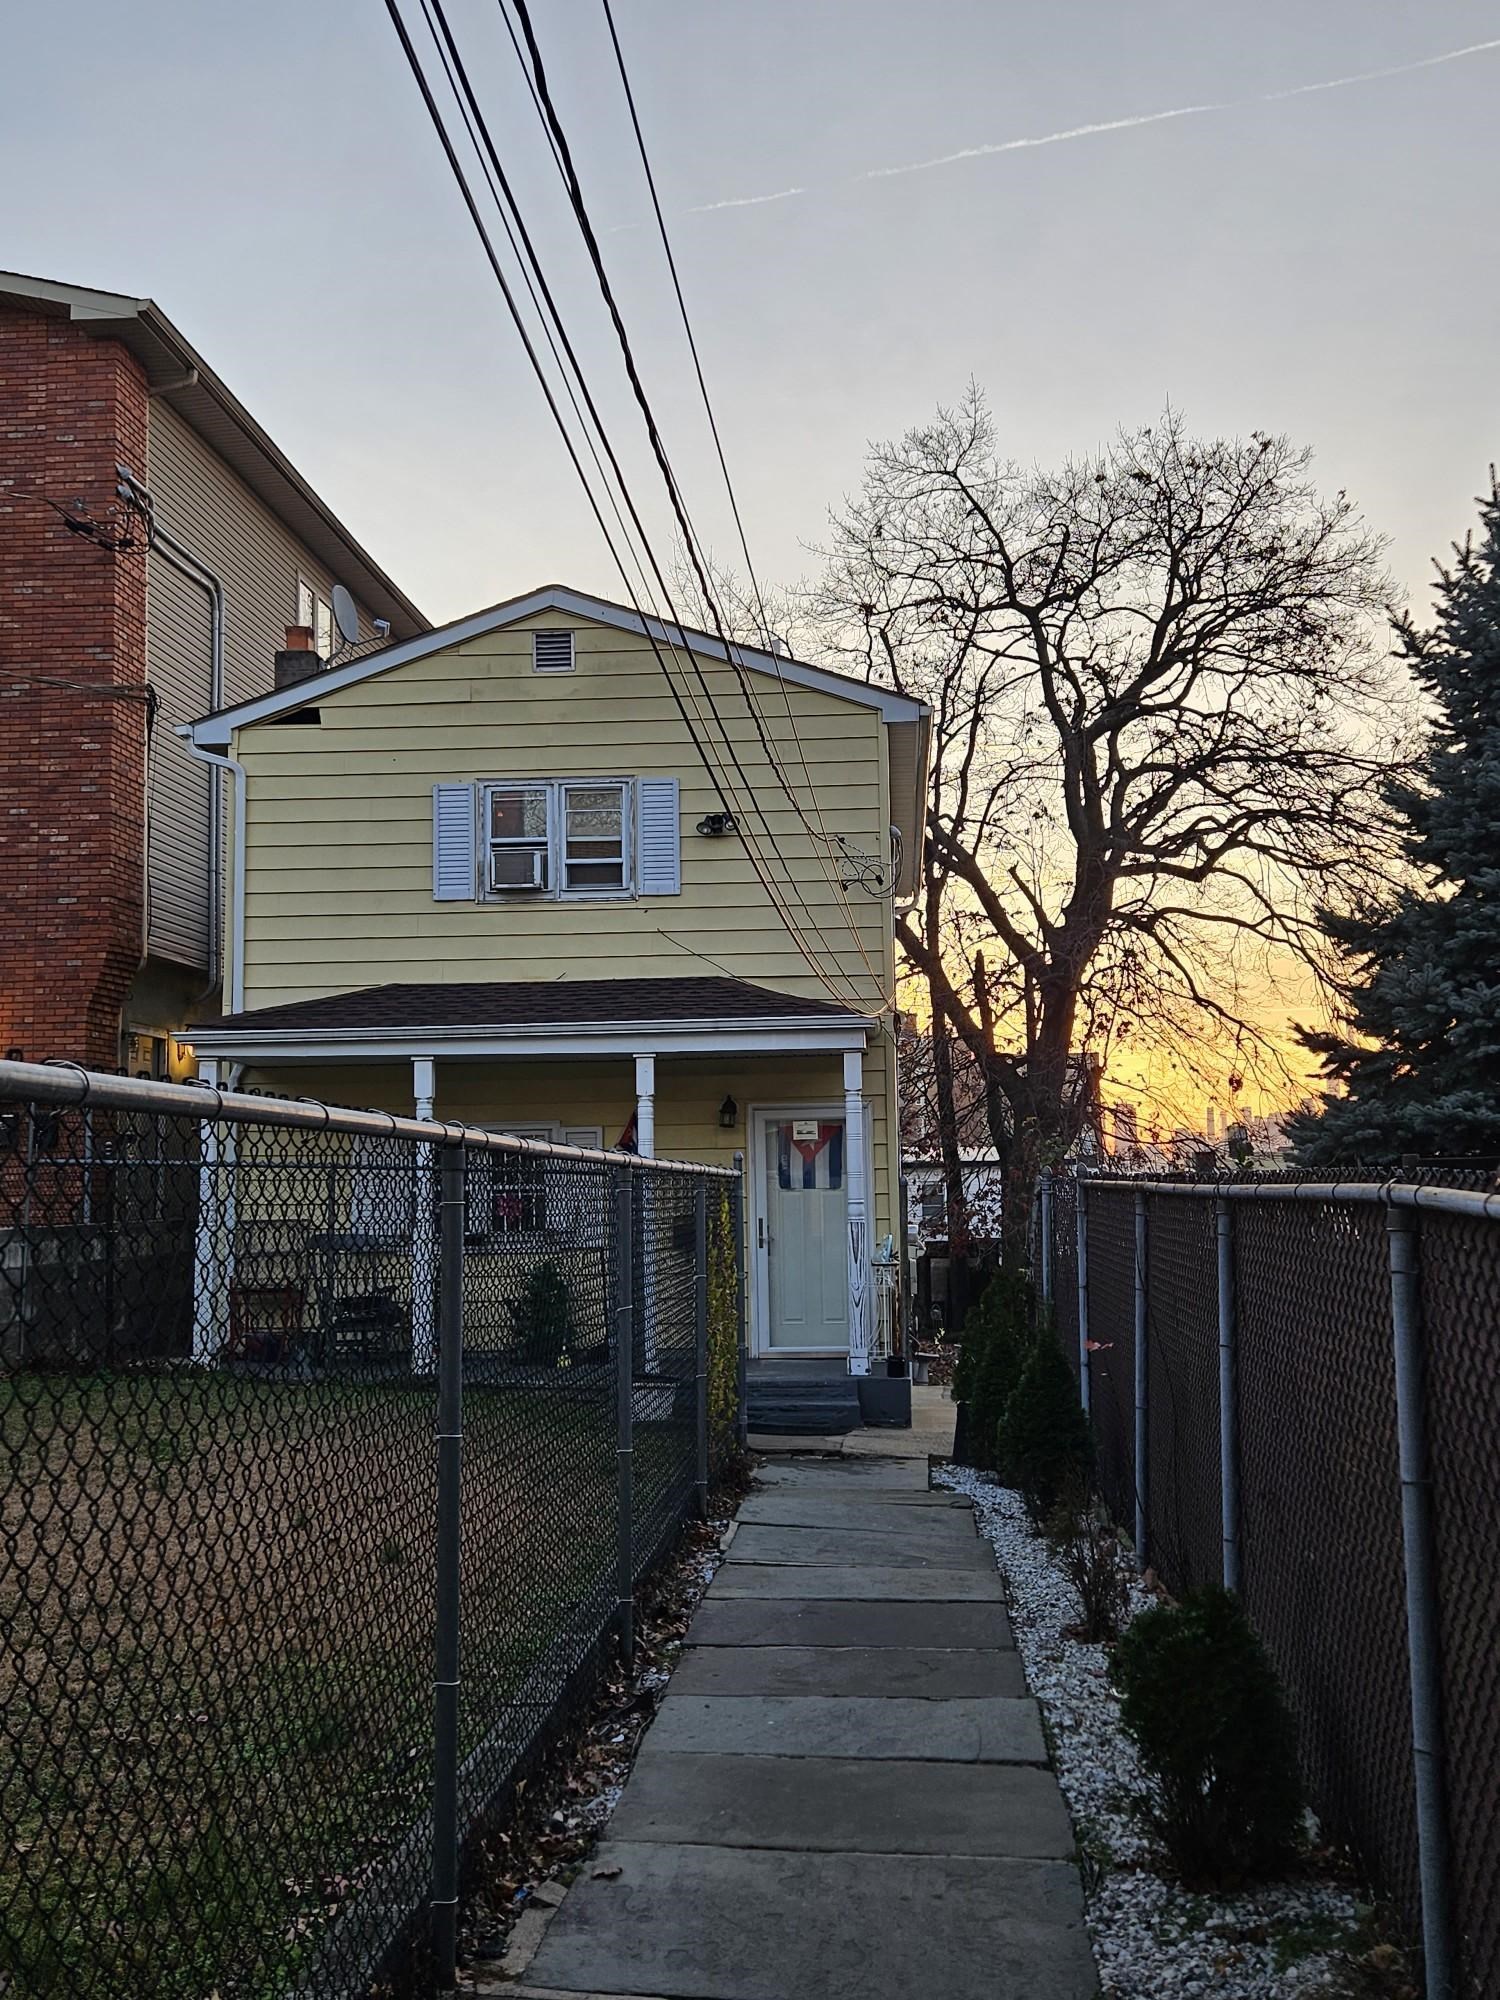 # 230019482 - For Rent in West New York NJ